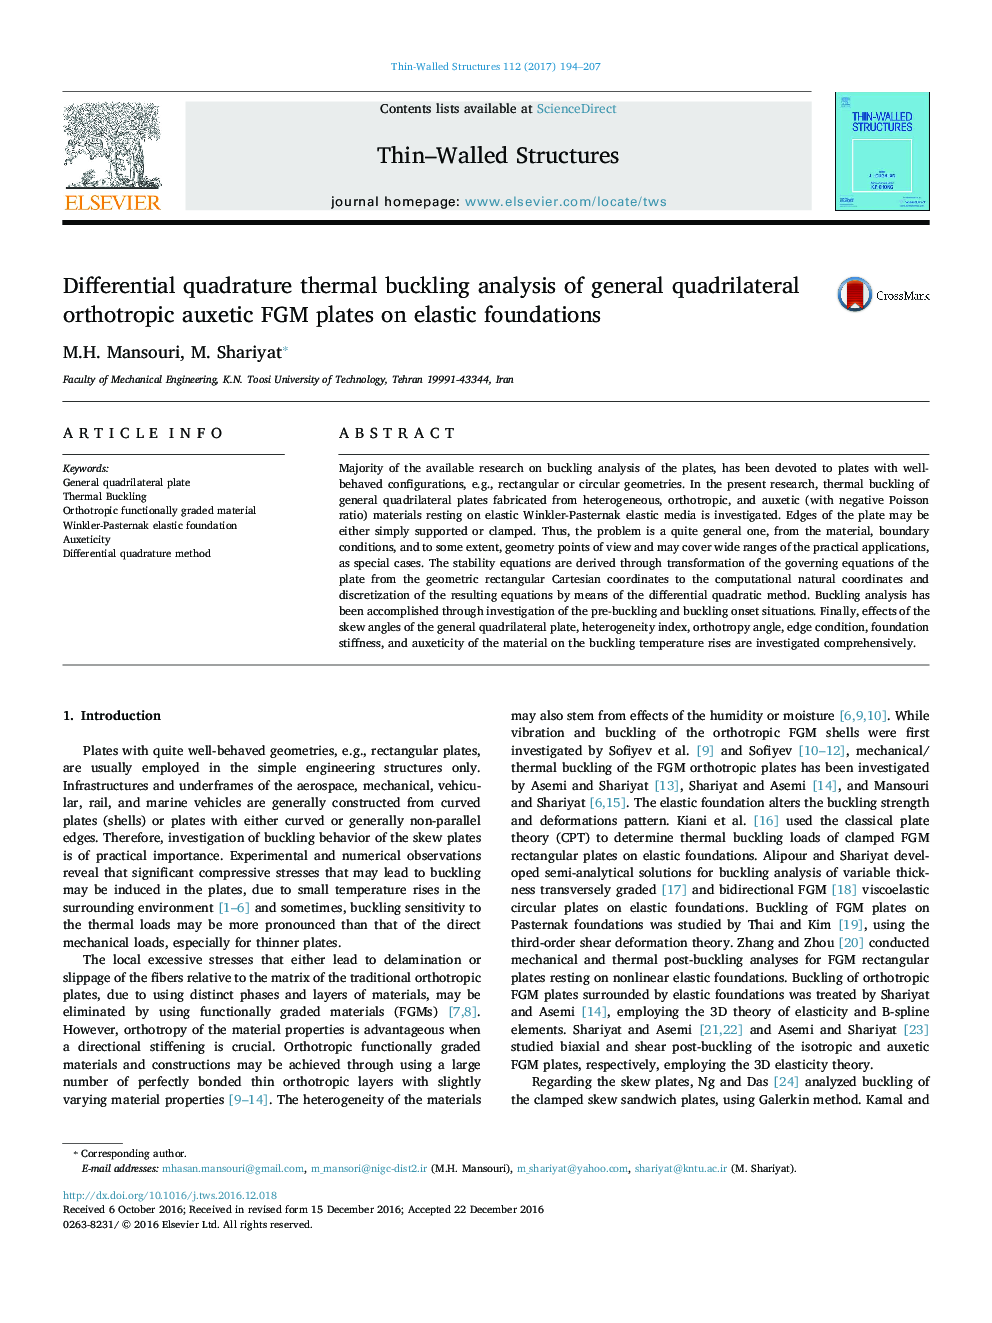 Differential quadrature thermal buckling analysis of general quadrilateral orthotropic auxetic FGM plates on elastic foundations